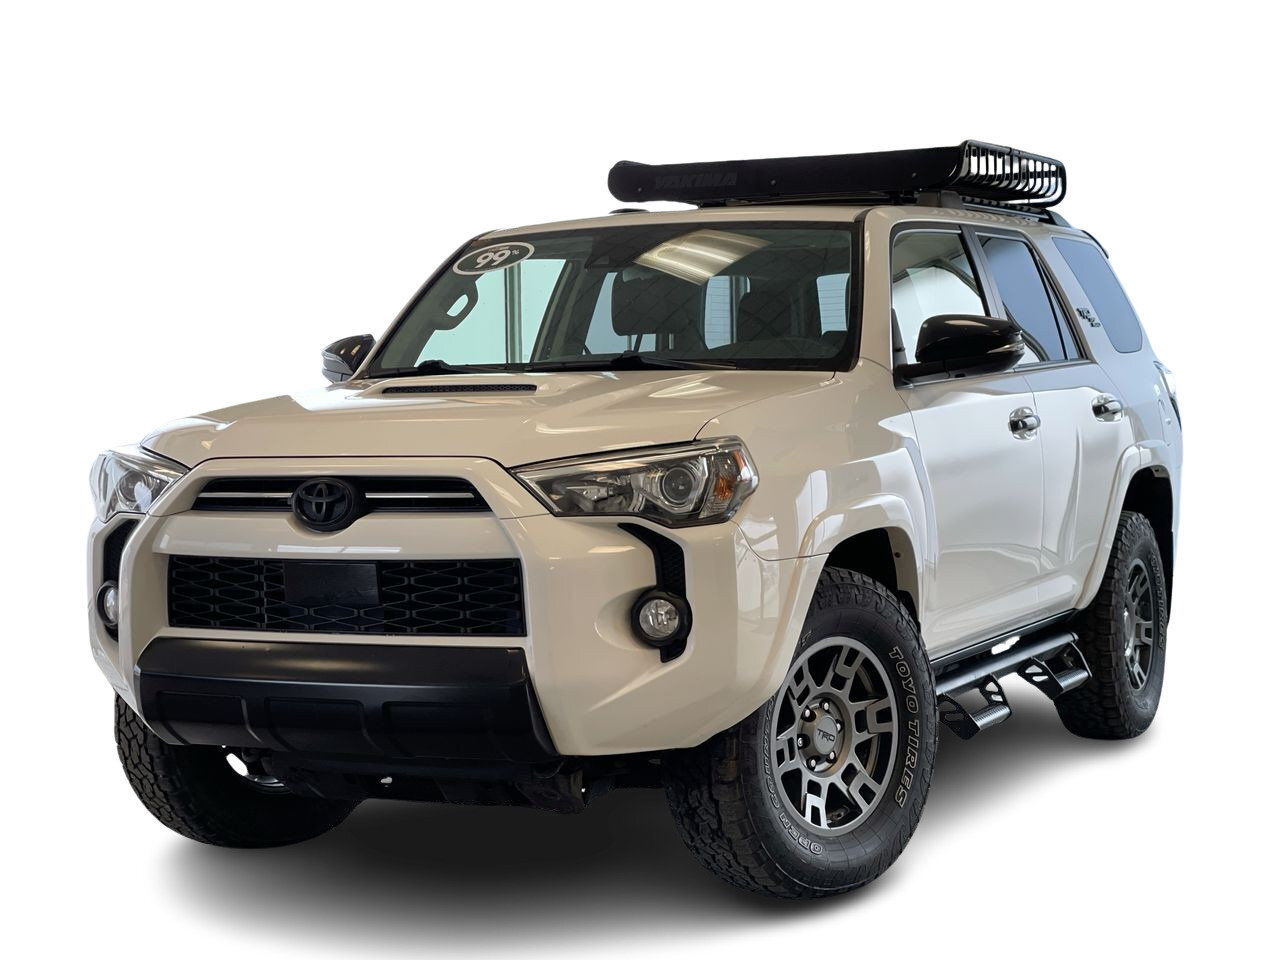 2020 Toyota 4Runner TRD Adventure Package Fully Loaded. 2 Sets of Tire